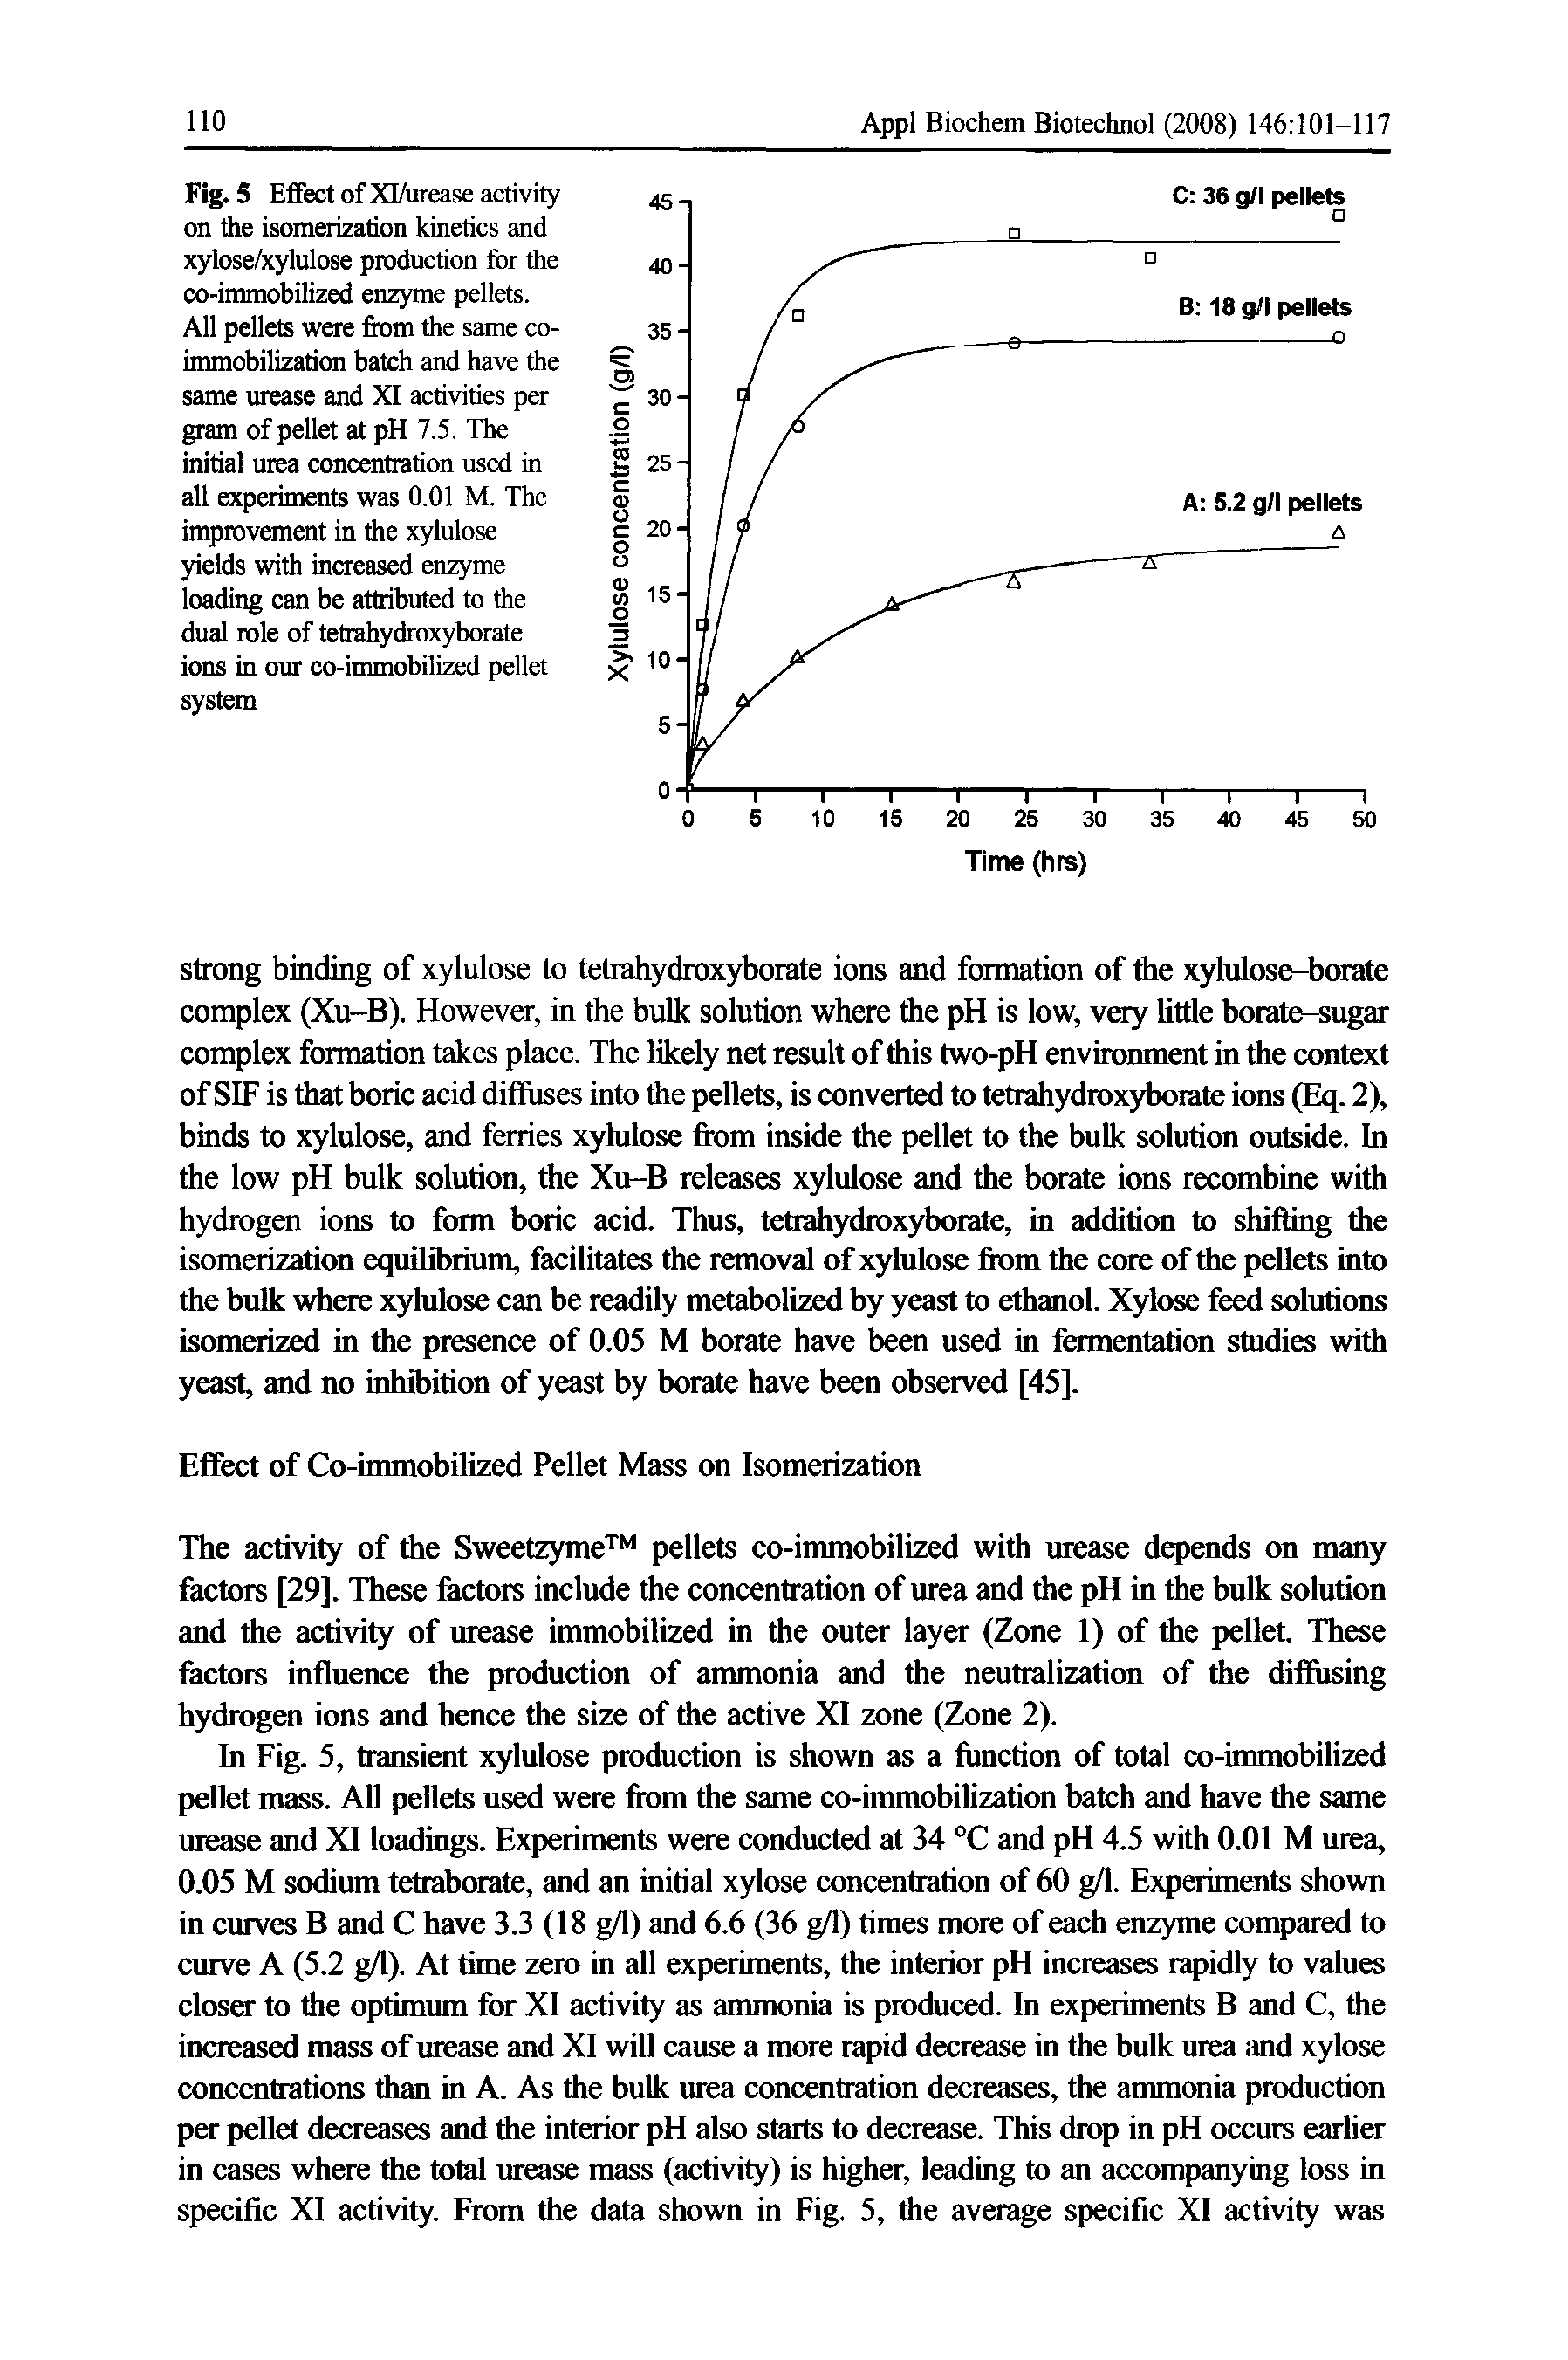 Fig. 5 Effect of Xl/urease activity on the isomerization kinetics and xylose/xylulose production for the co-immobilized enzyme pellets. All pellets were from the same coimmobilization batch and have the same urease and XI activities per gram of pellet at pH 7.5, The initial urea concentration used in all experiments was 0.01 M. The improvement in the xylulose yields with increased enzyme loading can be attributed to the dual role of tetrahydroxyborate ions in our co-immobilized pellet system...